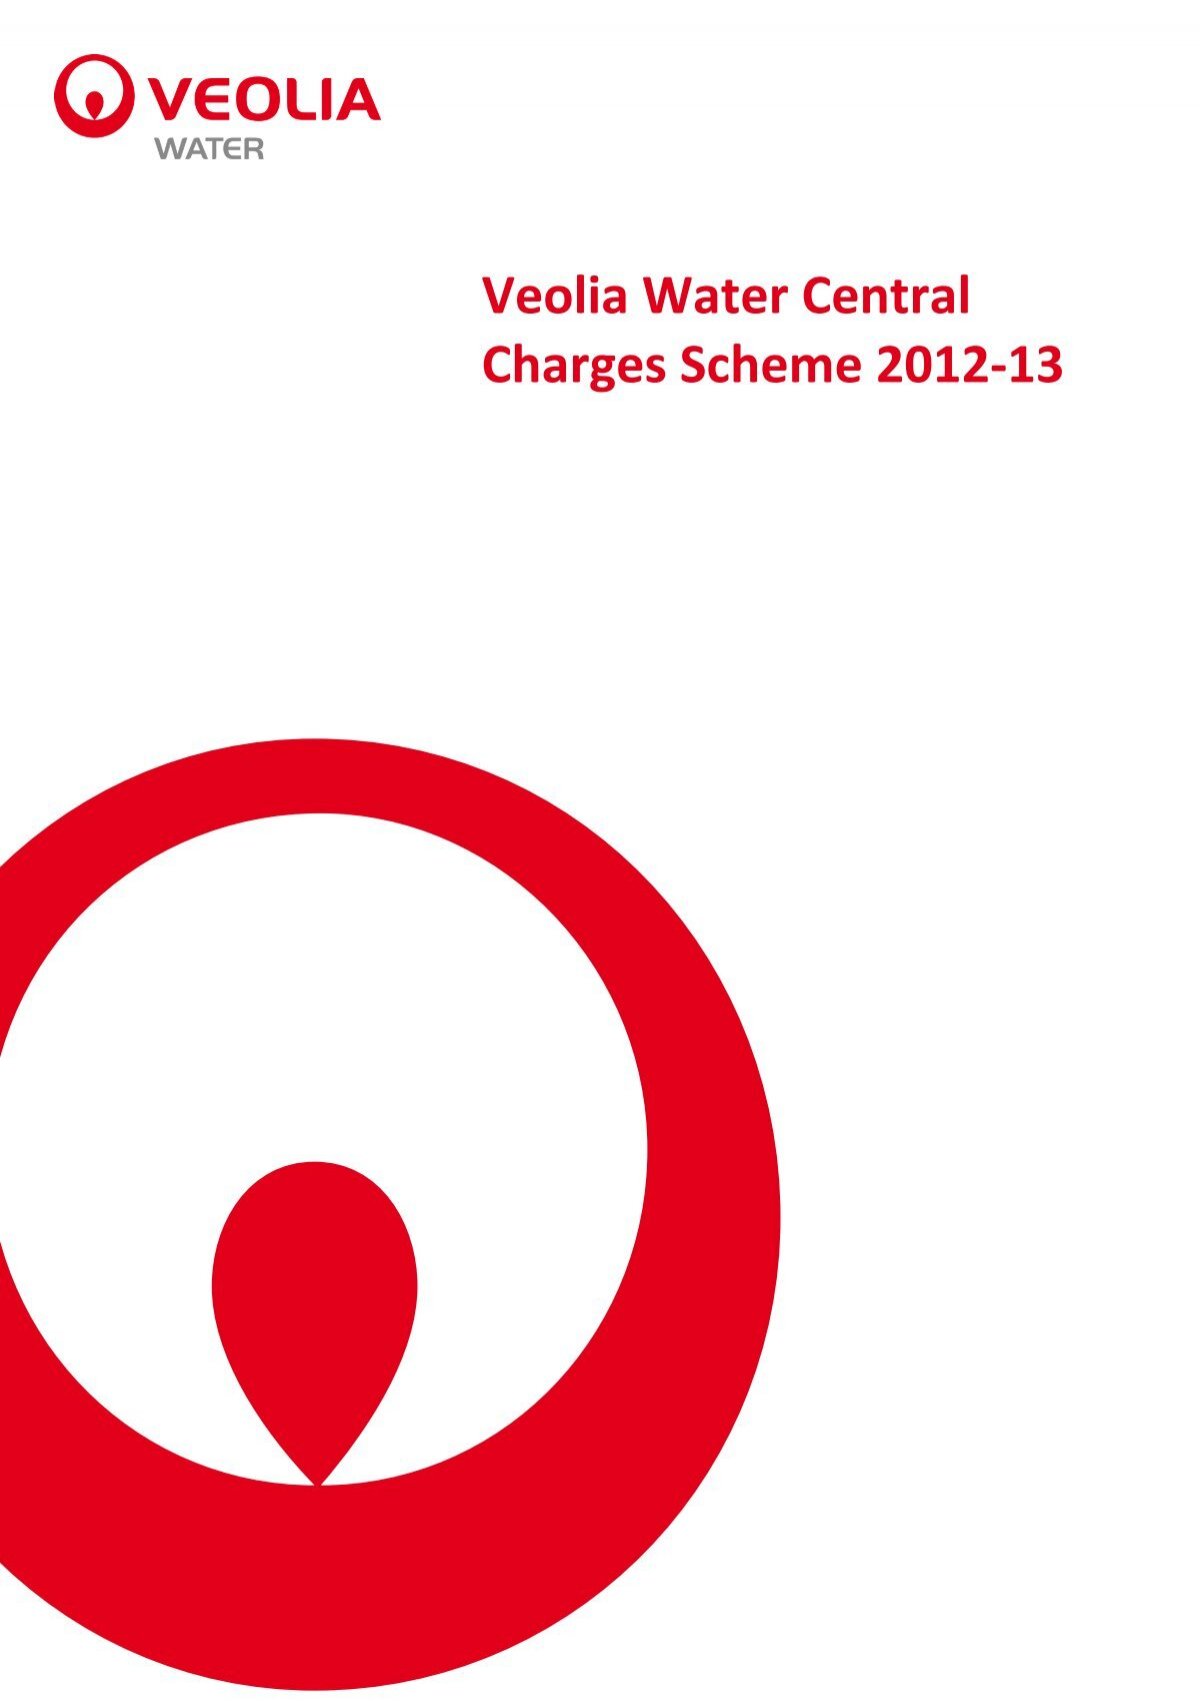 veolia-water-central-charges-scheme-2012-13-affinity-water